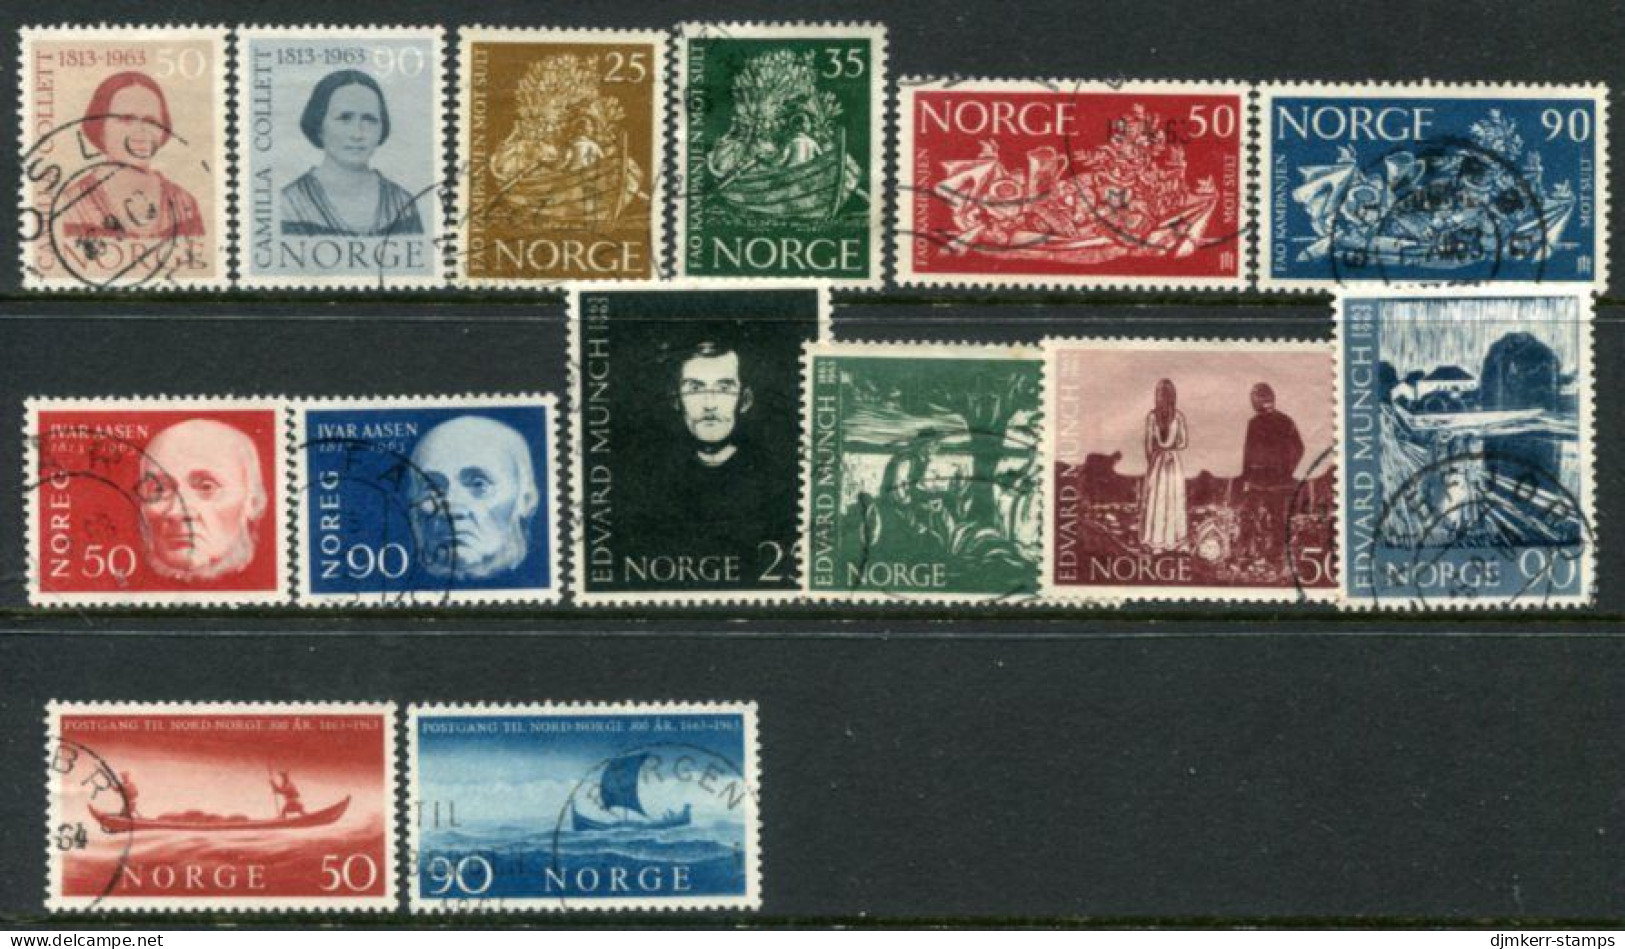 NORWAY 1963 Five Issues Used. - Usati